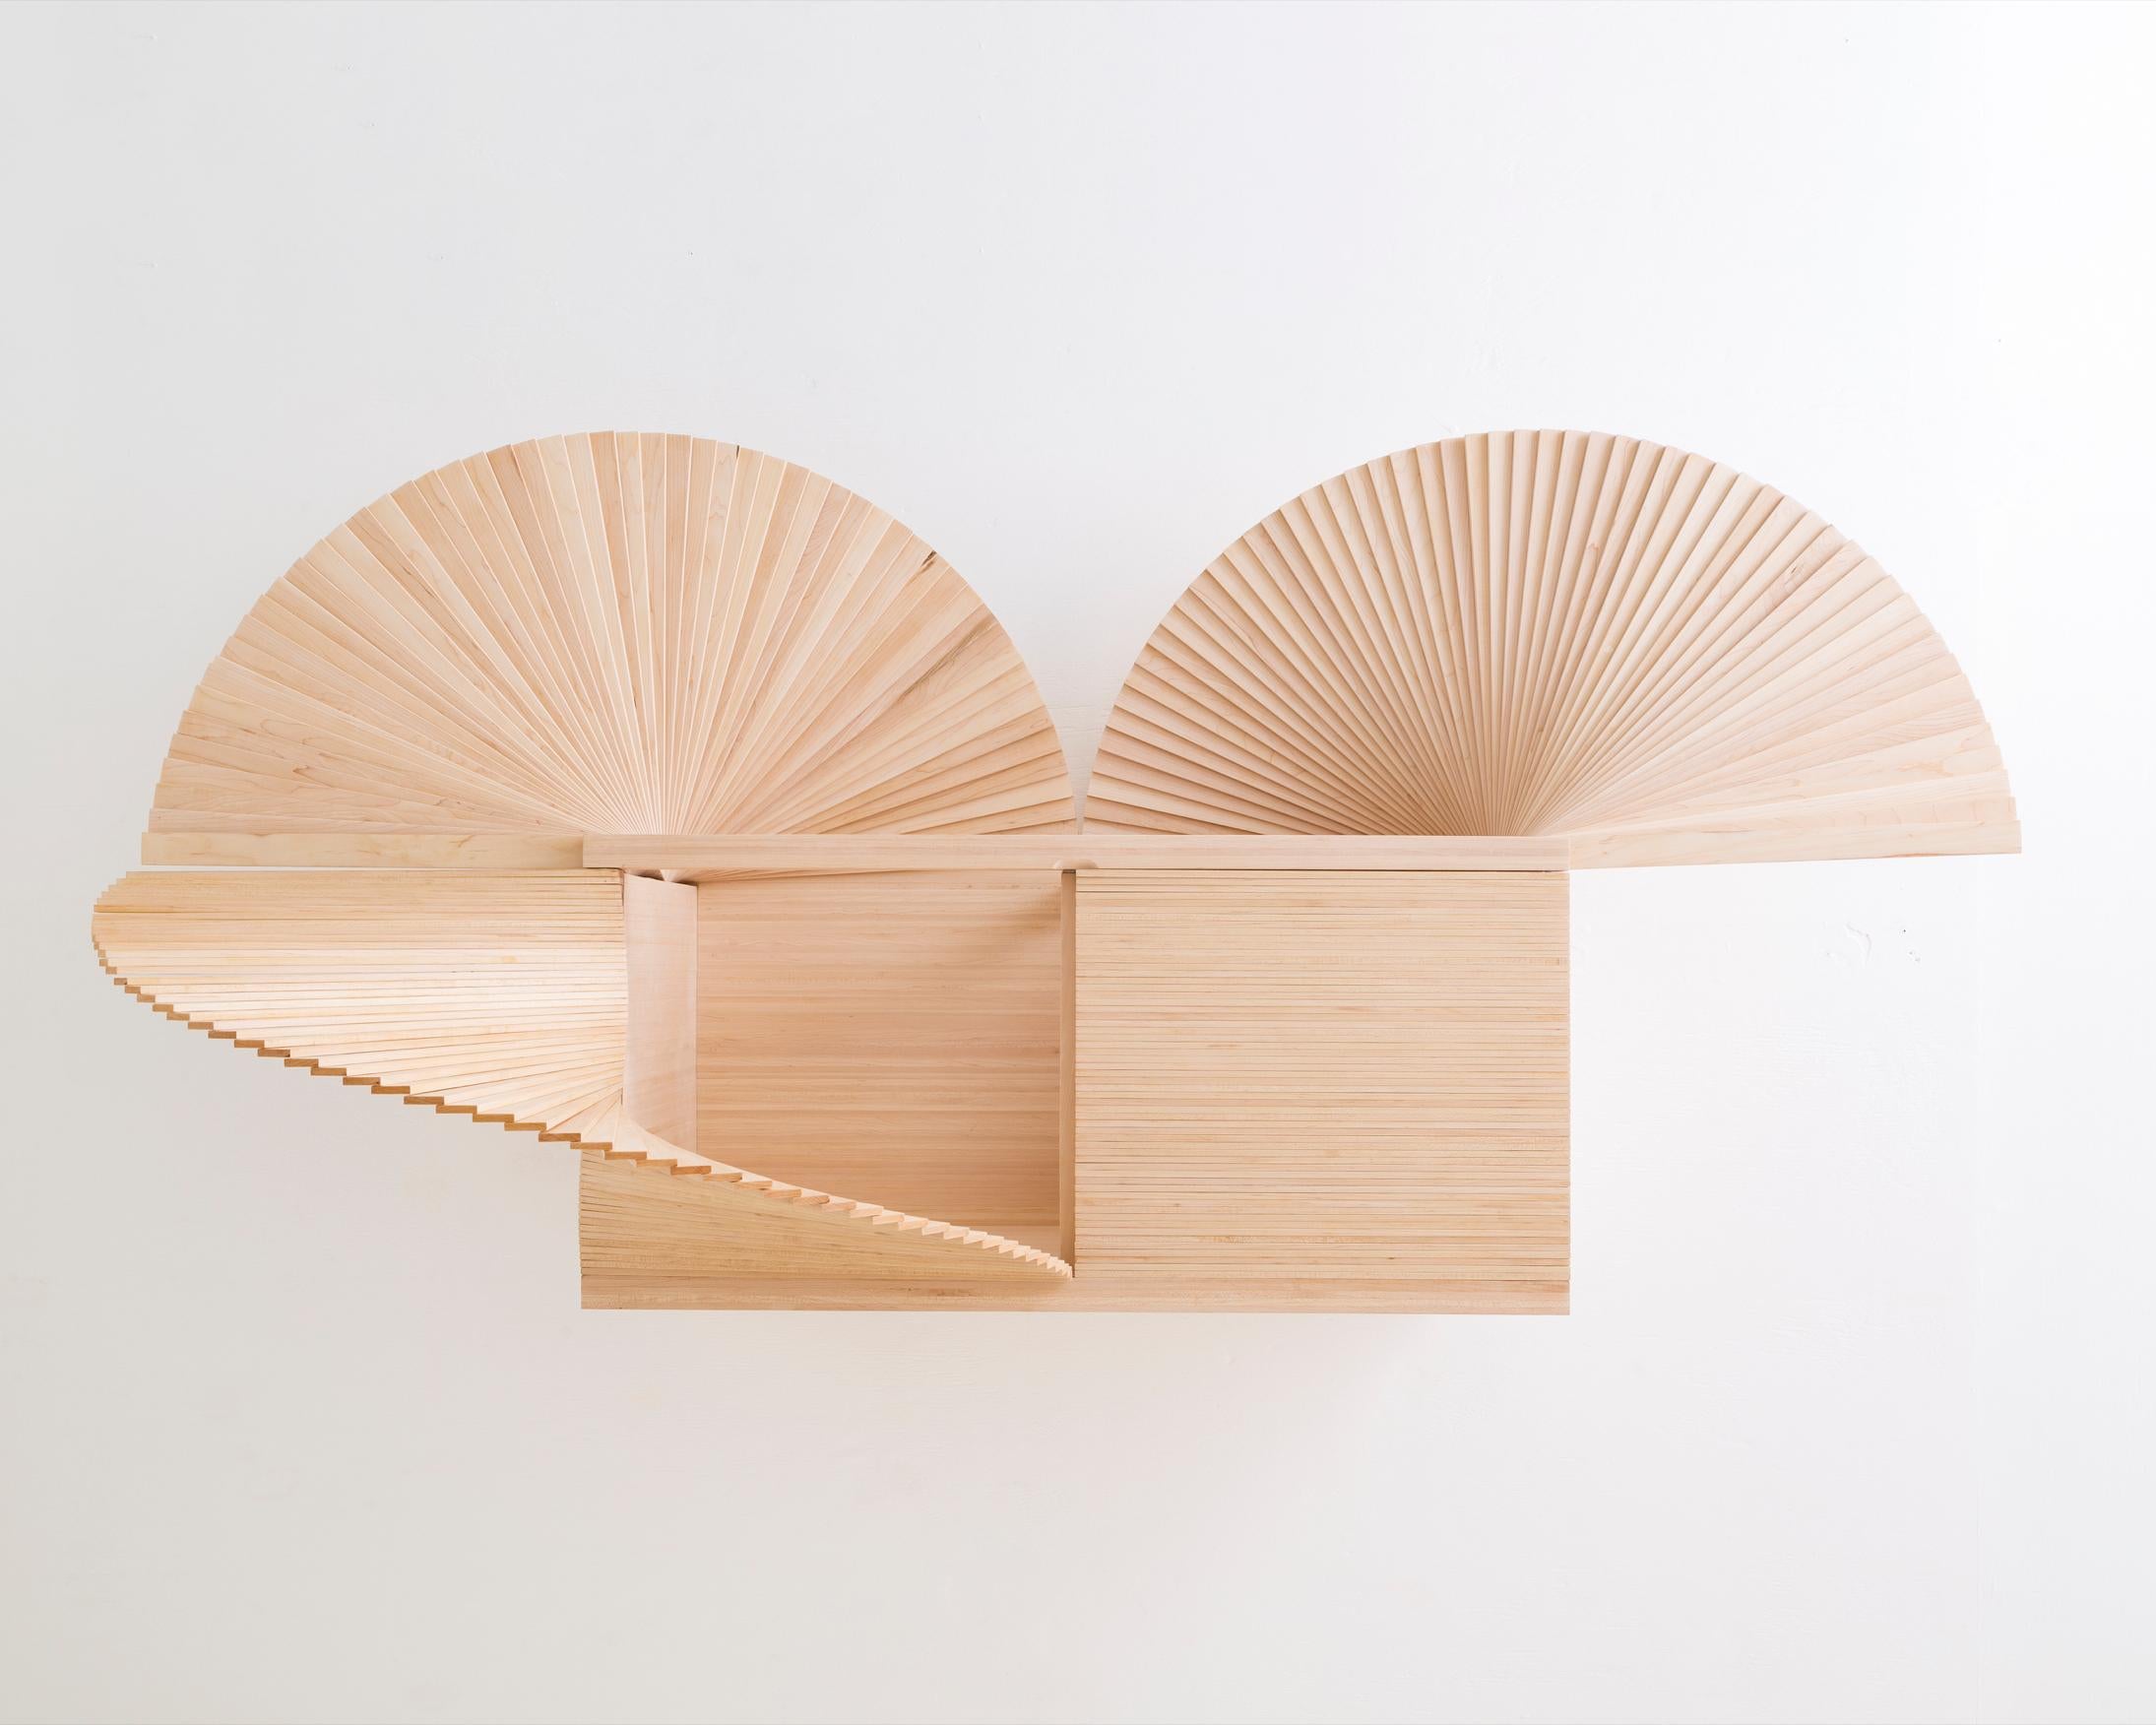 Sebastian Errazuriz. Fan cabinet. Wood, metal elements. USA. Designed and made in 2018. AP1 from the Edition of 8 + 2 APs.
 